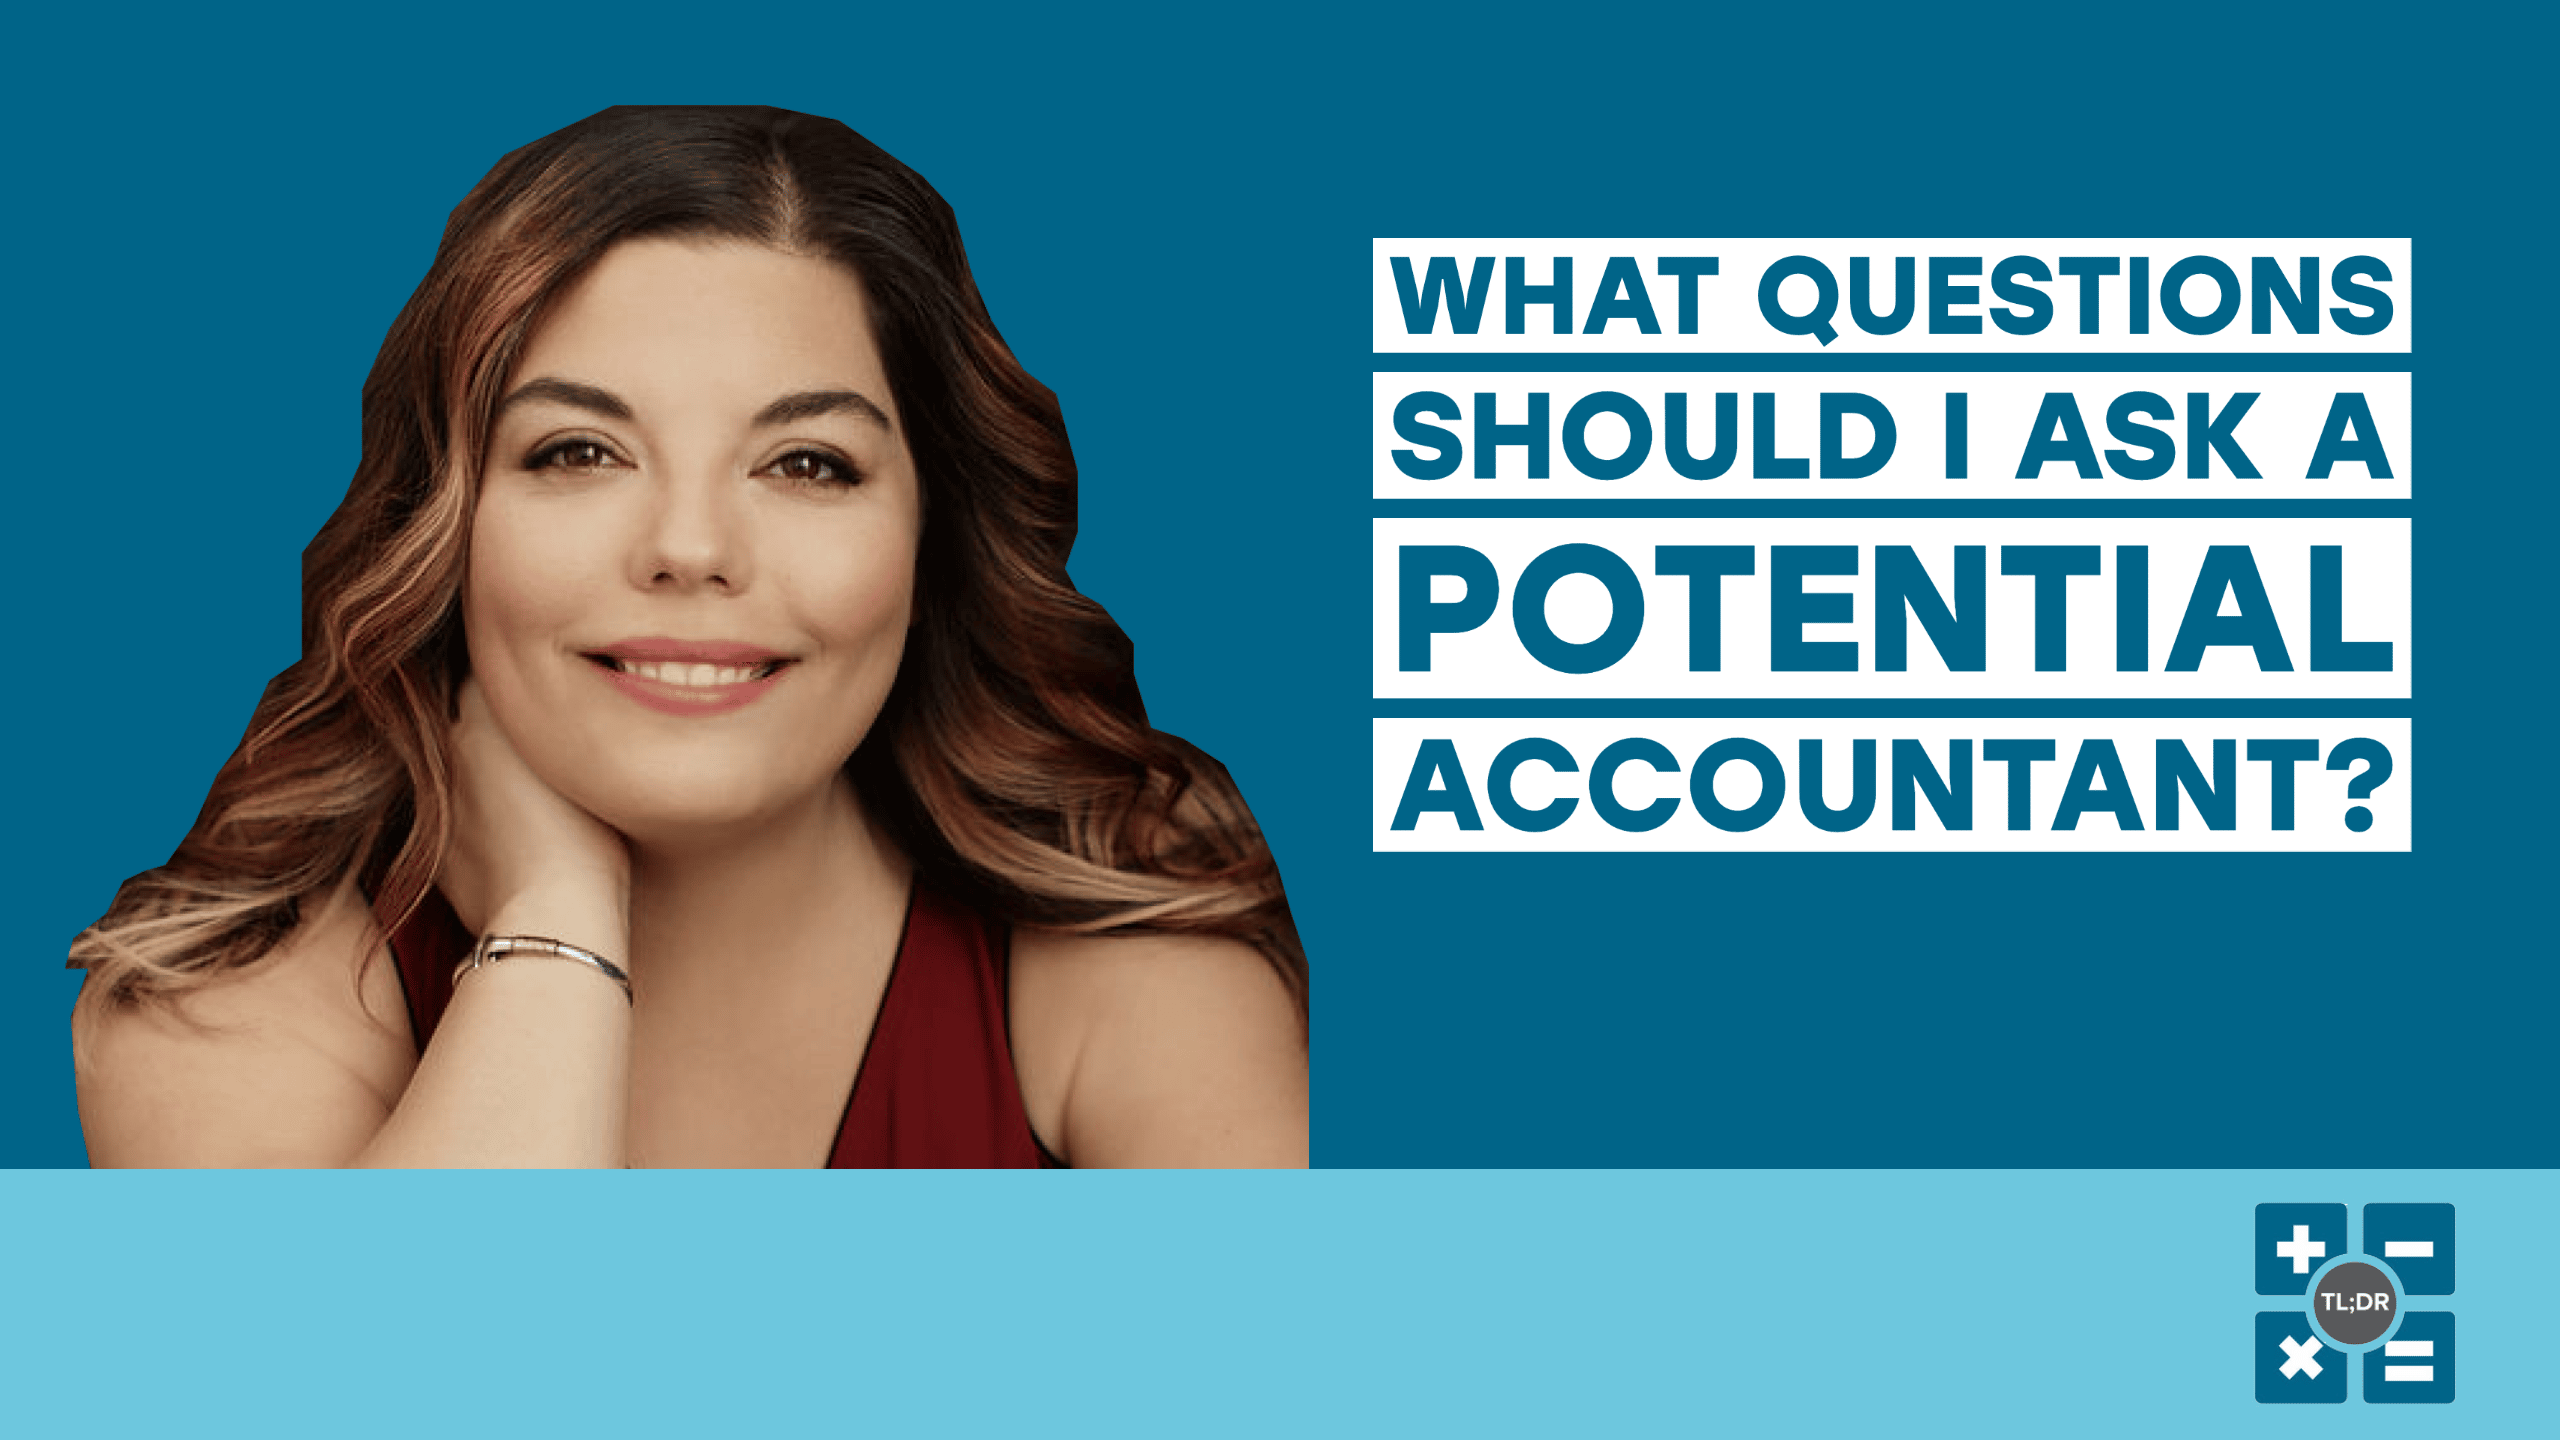 What Questions Should I Ask a Potential Accountant?